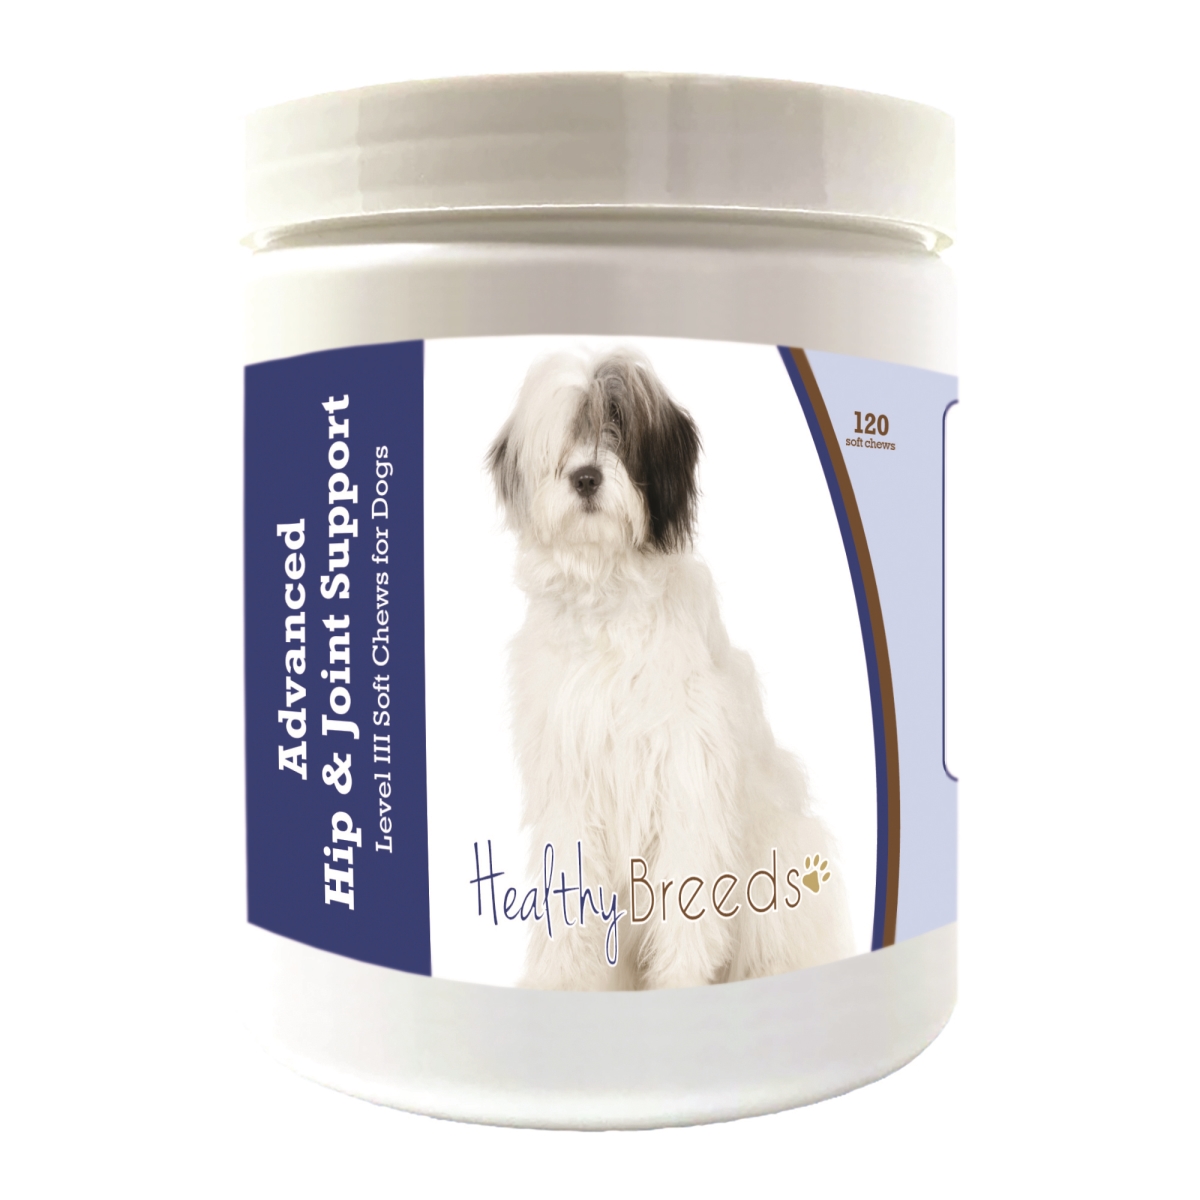 Picture of Healthy Breeds 192959899214 Old English Sheepdog Advanced Hip & Joint Support Level III Soft Chews for Dogs